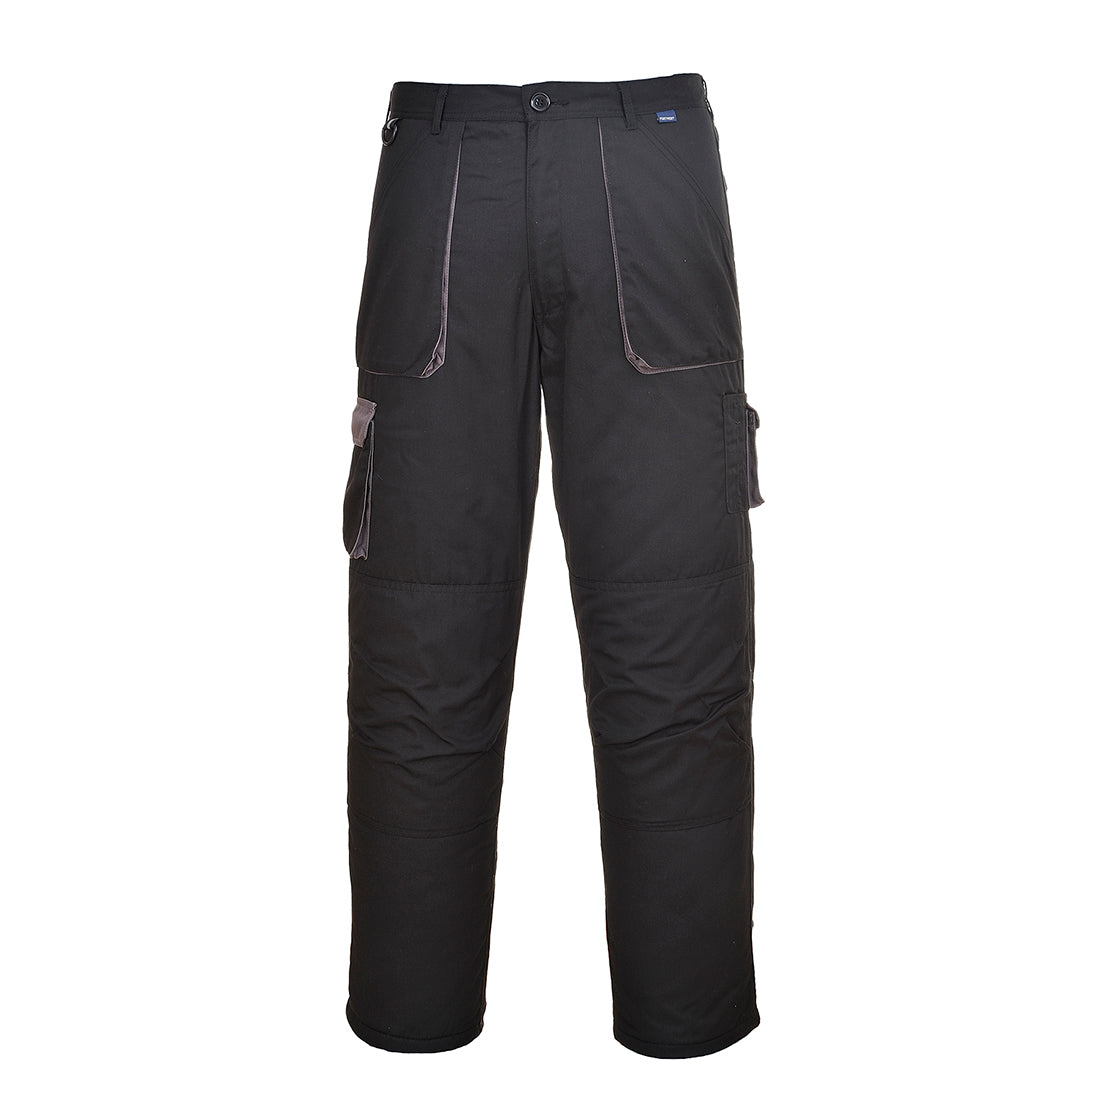 Portwest Portwest Texo Contrast Trousers - Lined